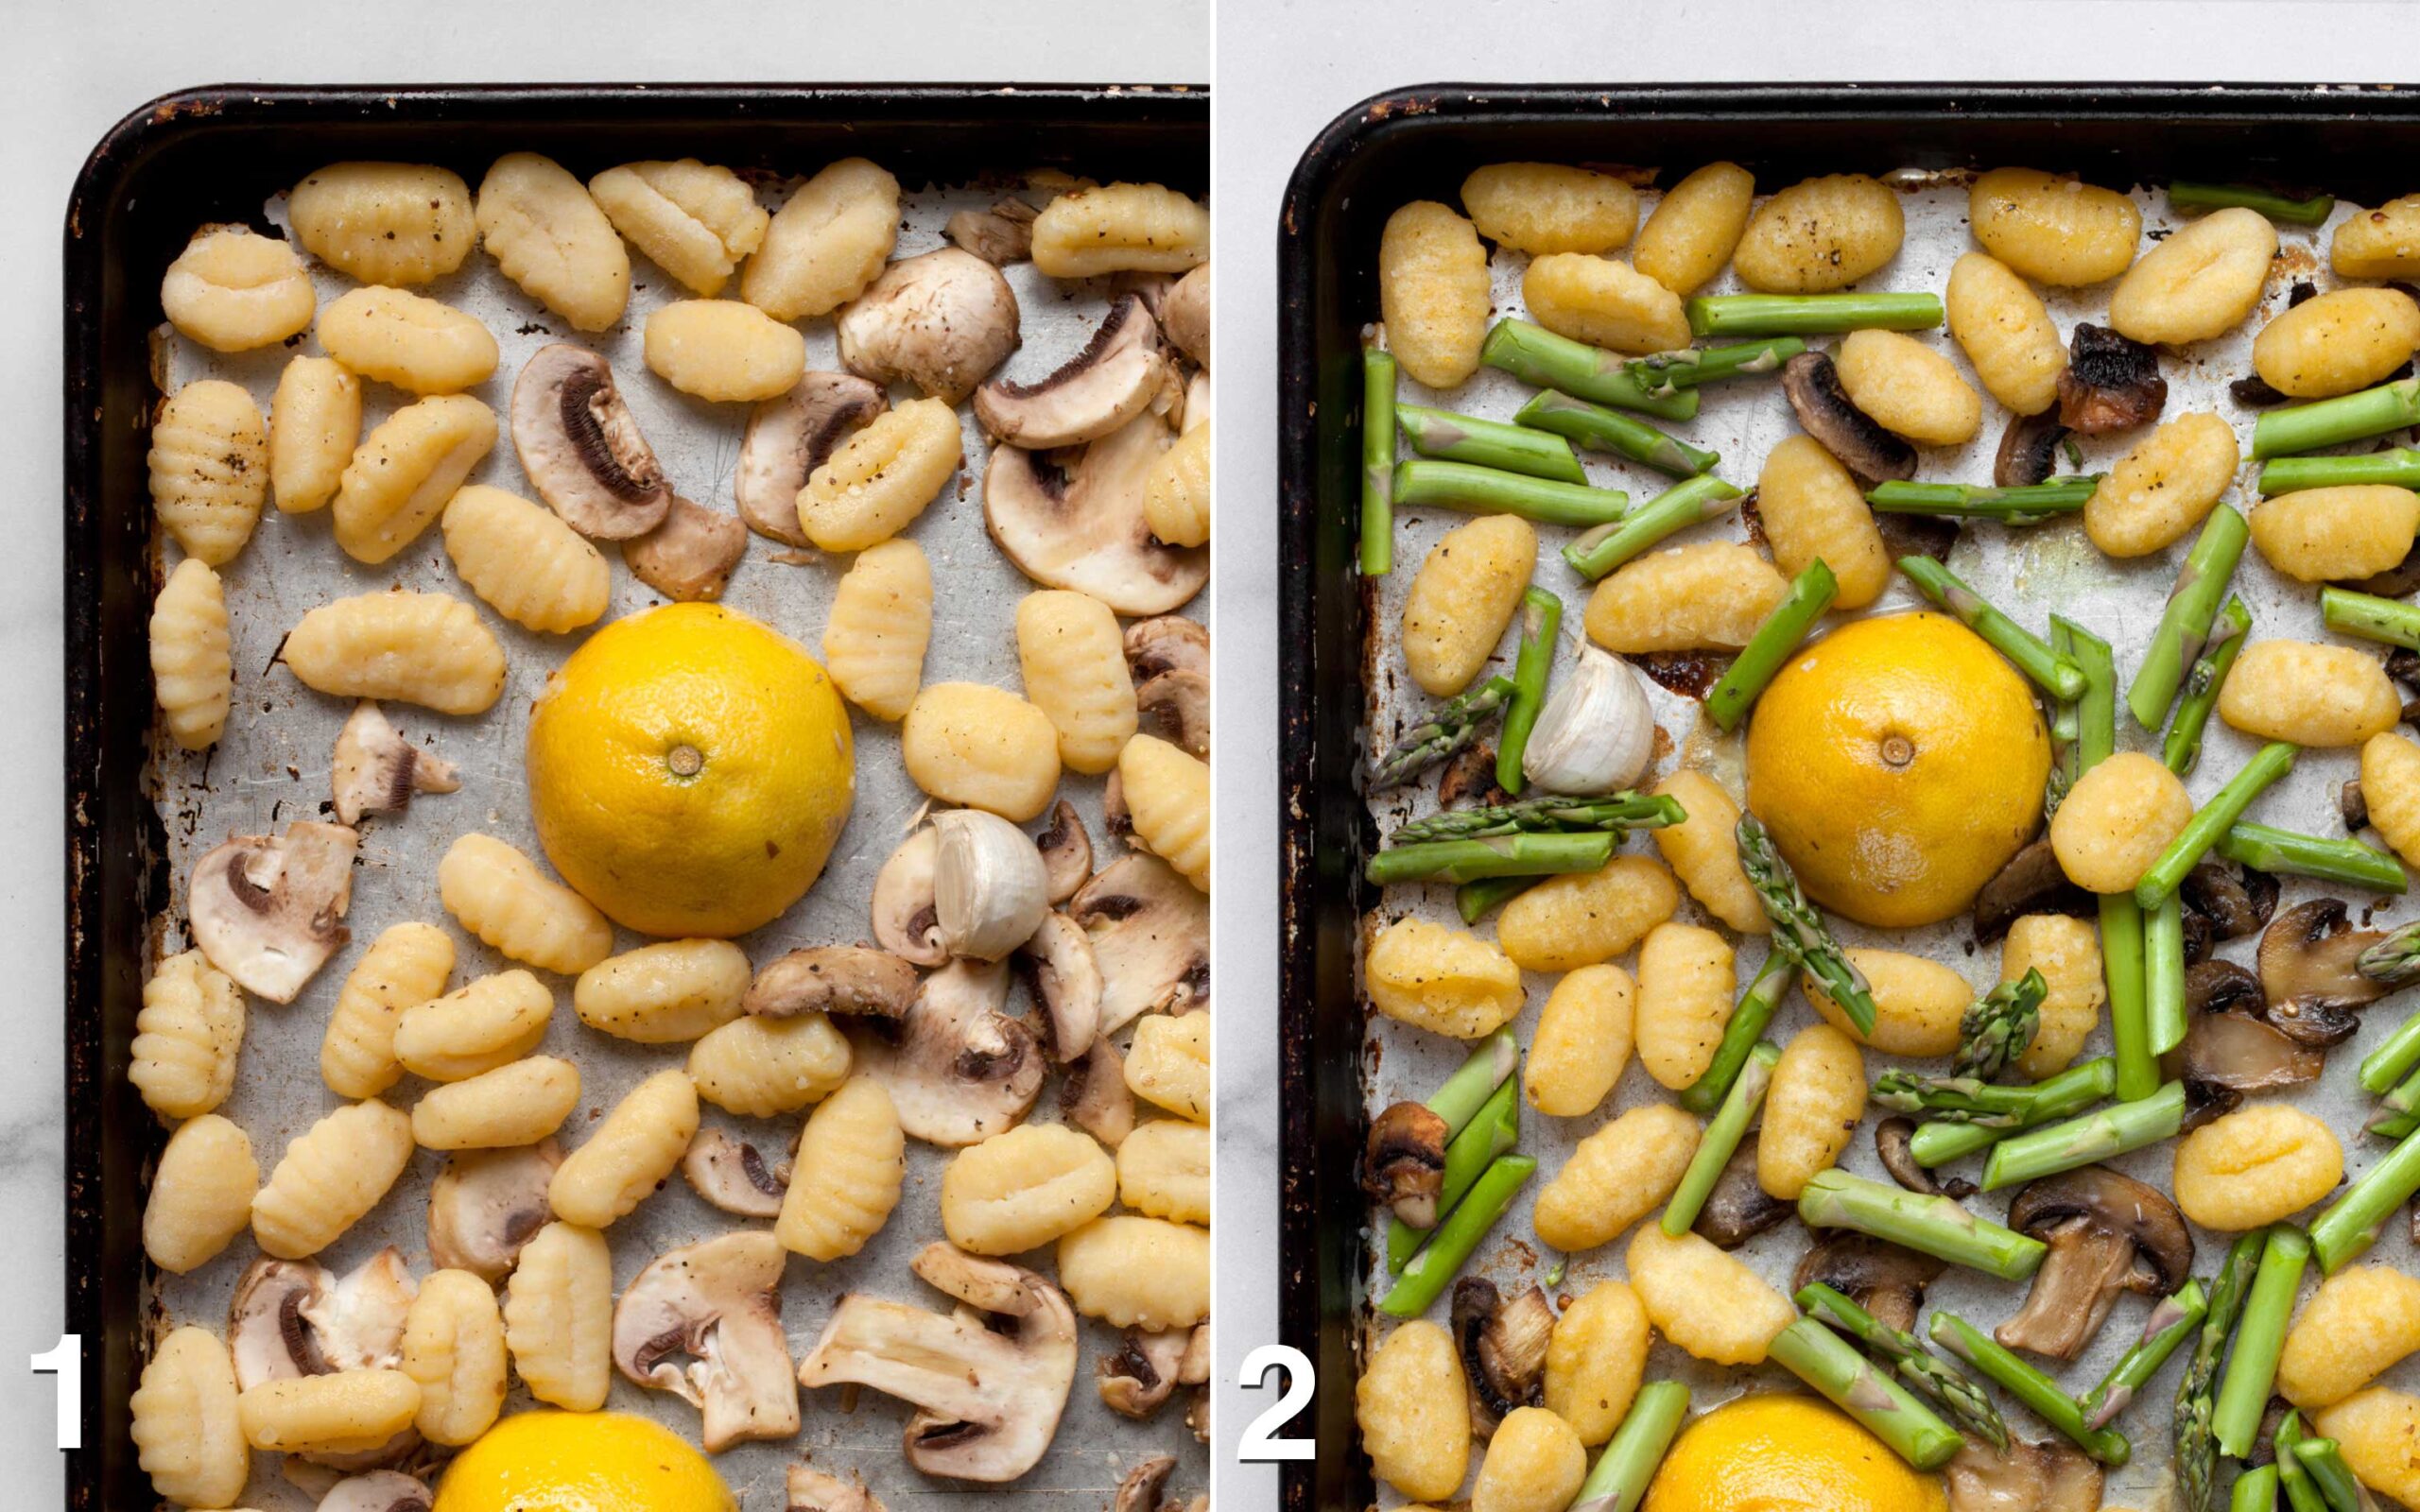 Gnocchi, mushrooms garlic and lemon on a sheet pan before they go into the oven. Asparagus added to the pan.